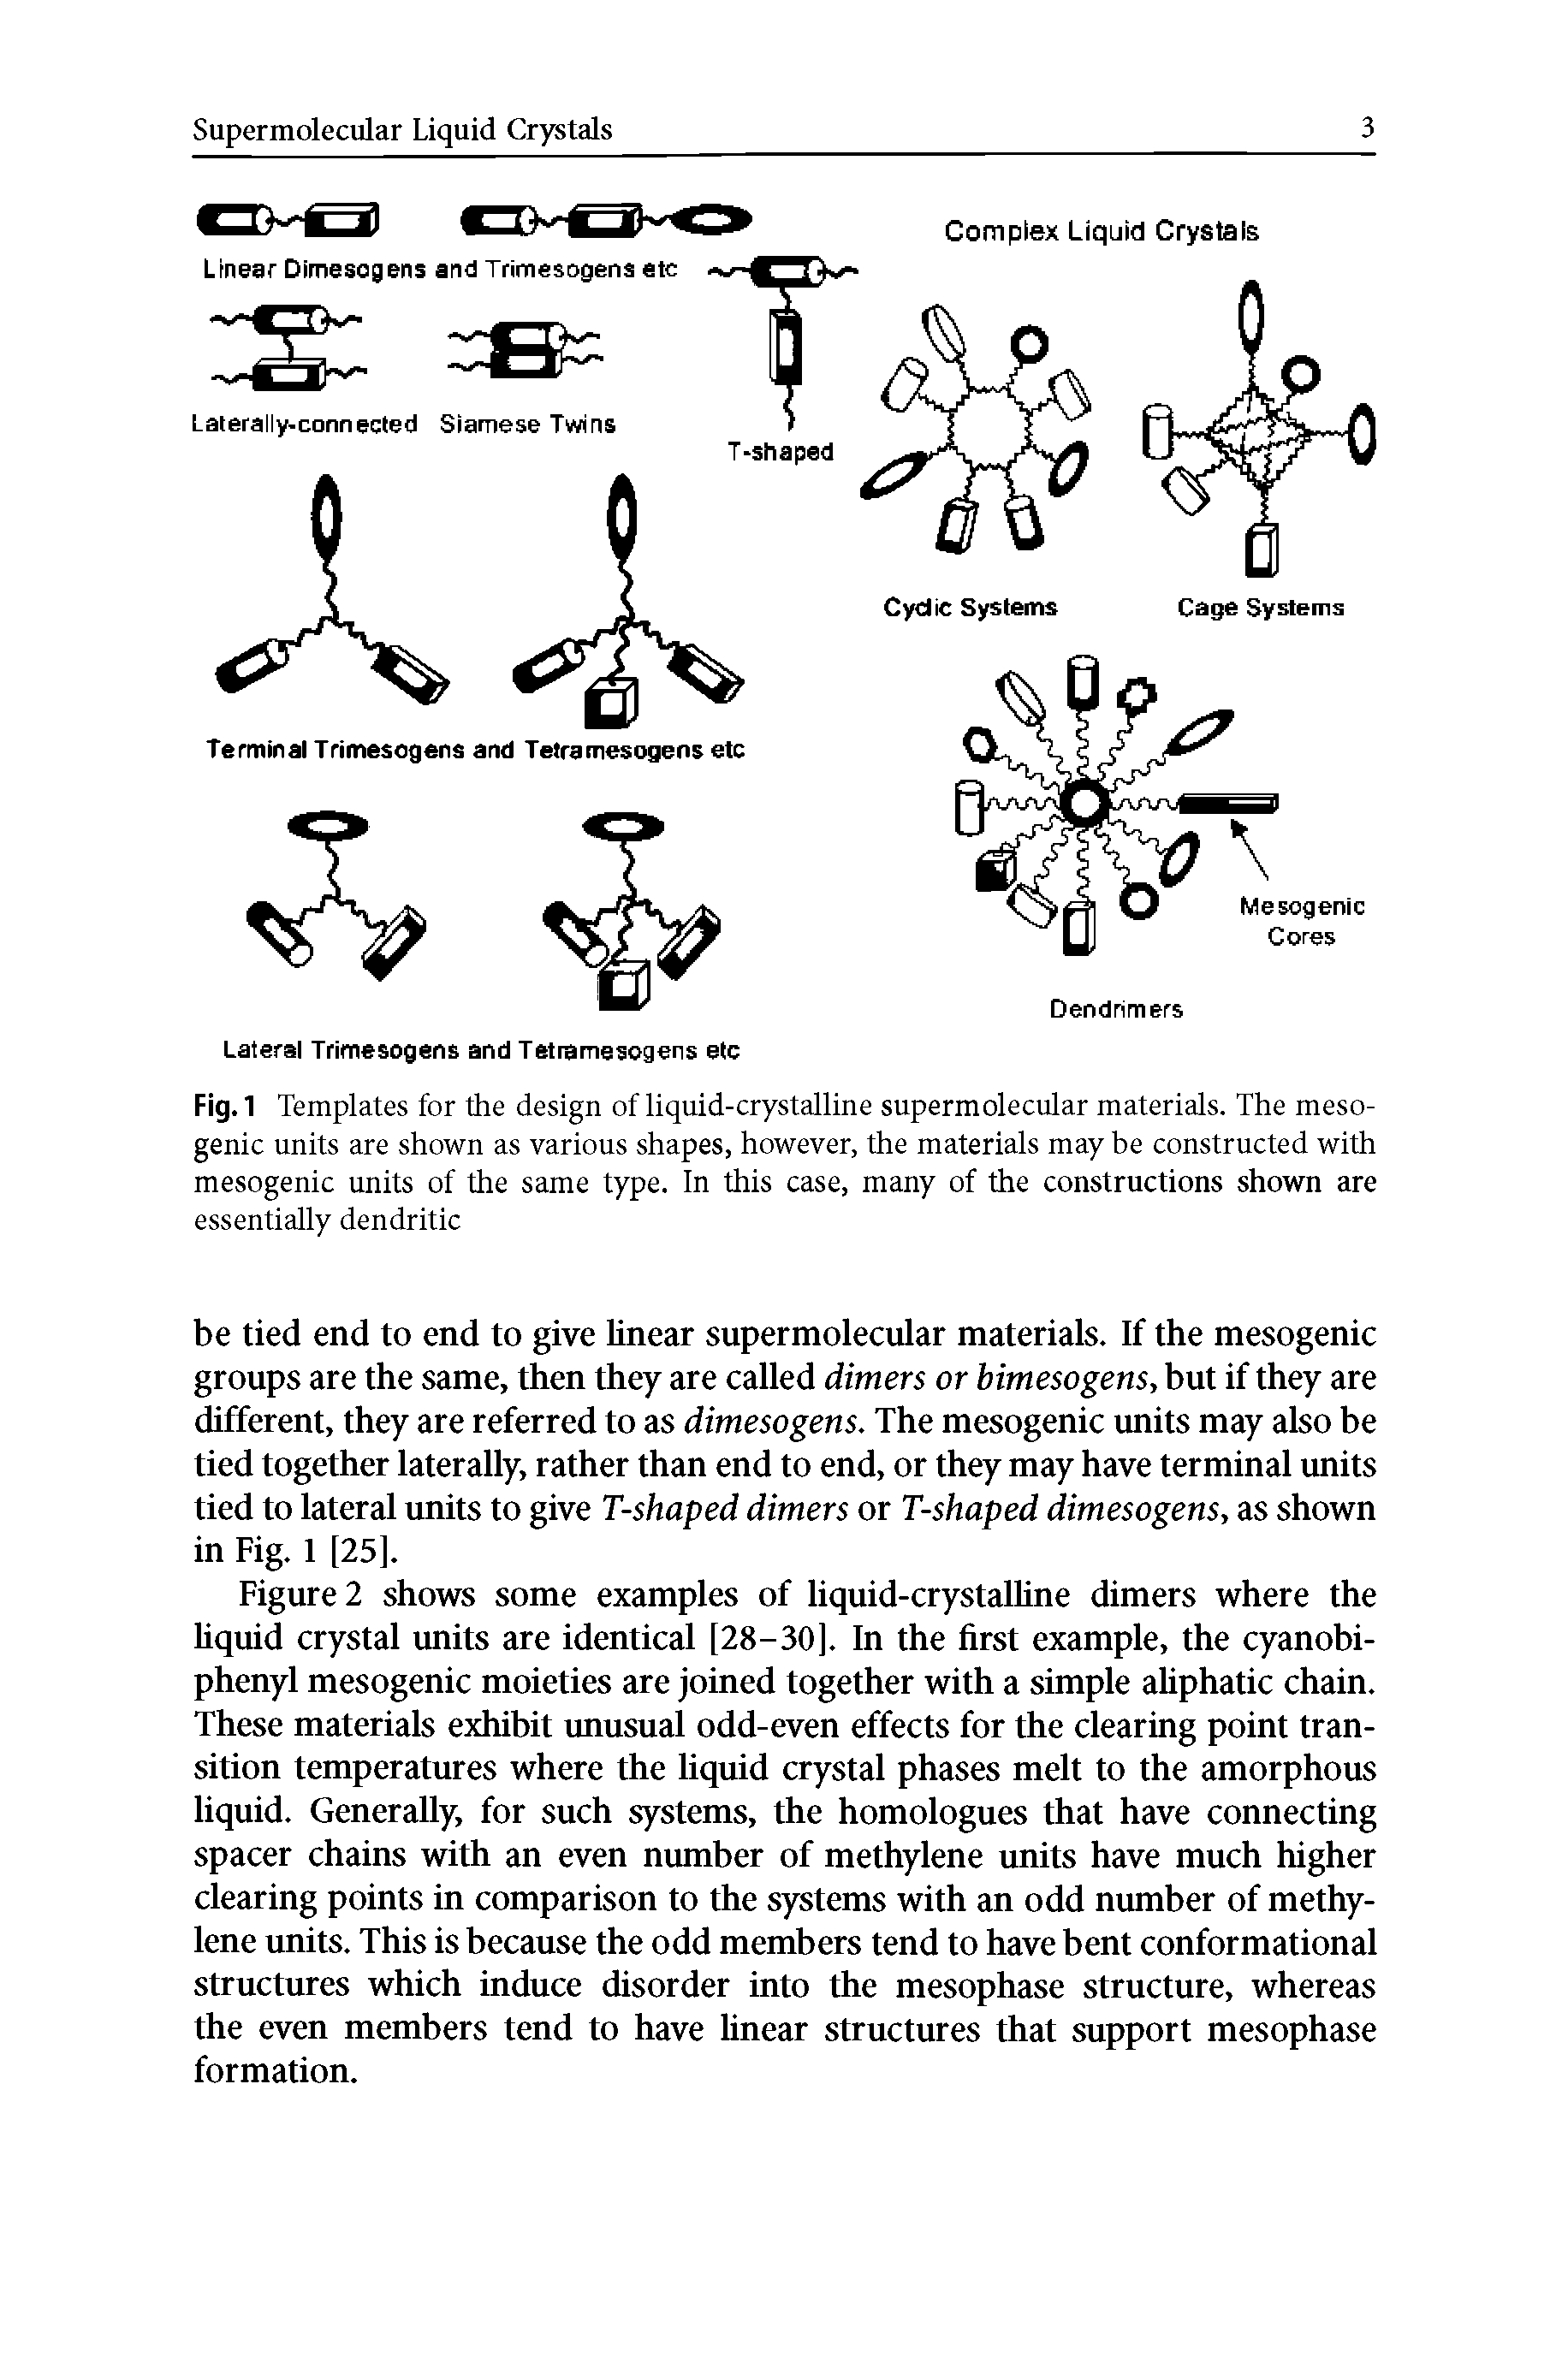 Fig. 1 Templates for the design of liquid-crystalline supermolecular materials. The meso-genic units are shown as various shapes, however, the materials may be constructed with mesogenic units of the same type. In this case, many of the constructions shown are essentially dendritic...